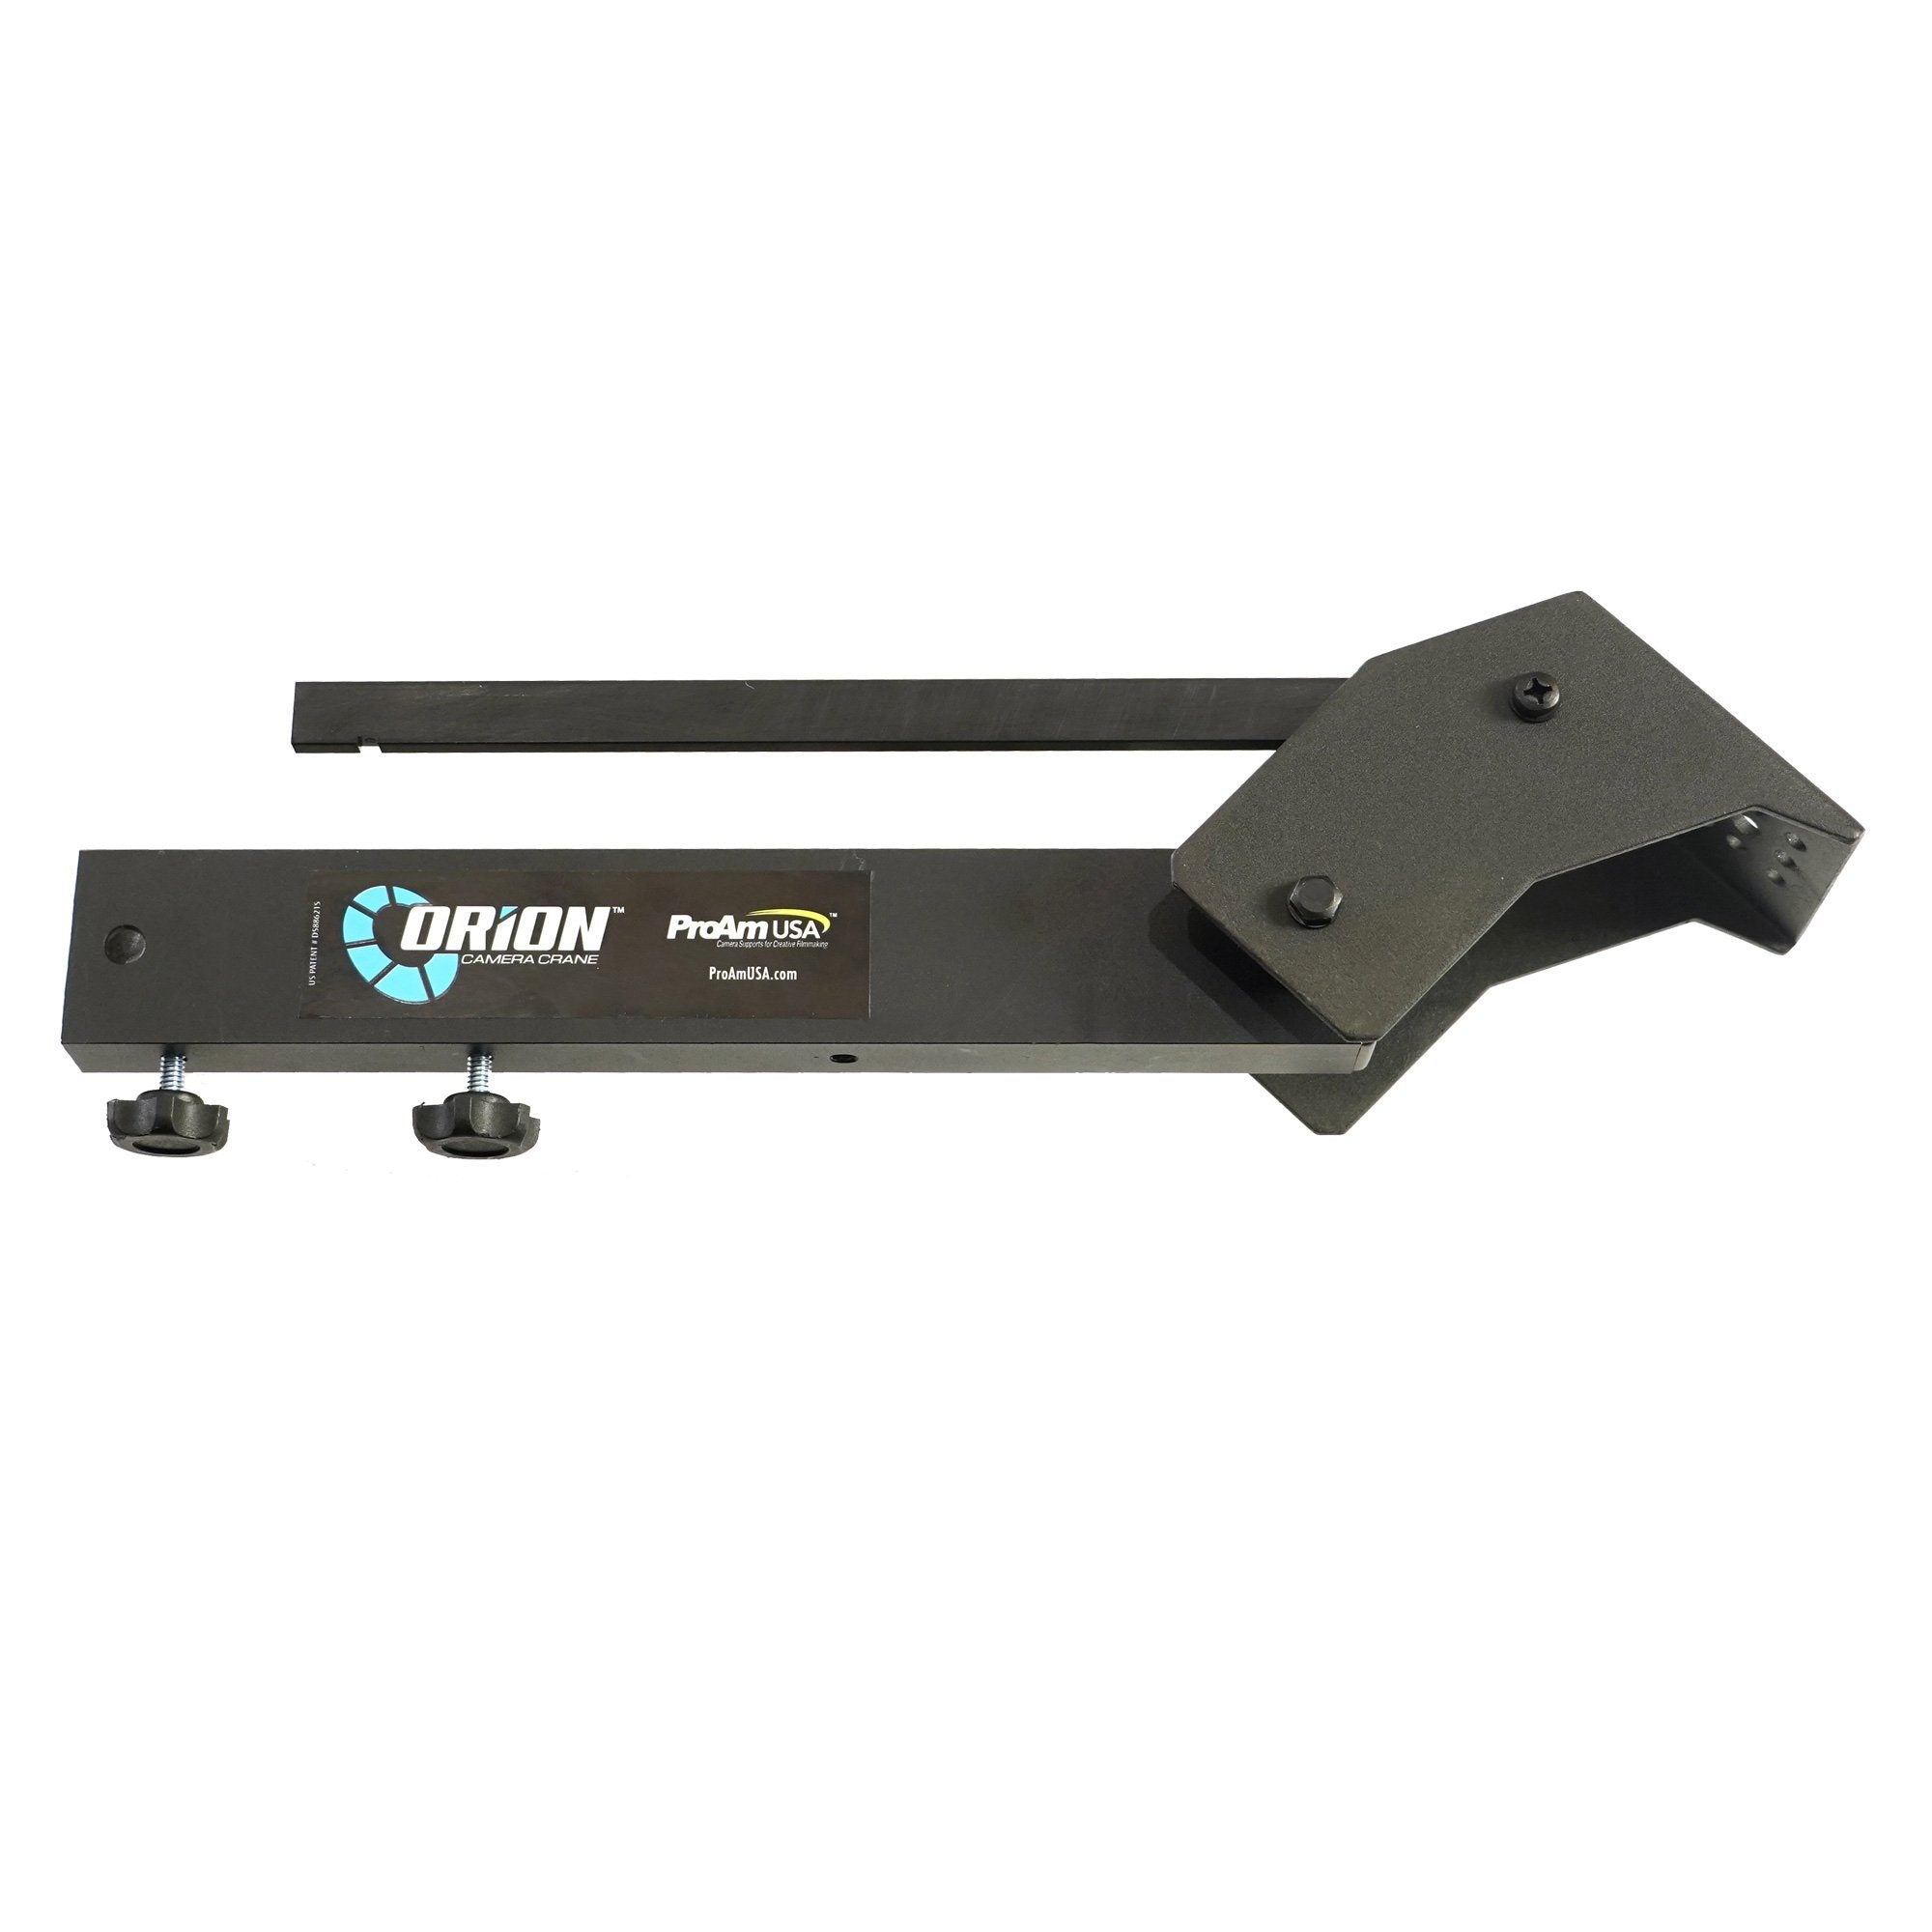 1 ft Short Head for Orion DVC200 and DVC210 Camera Cranes - PRODUCTS